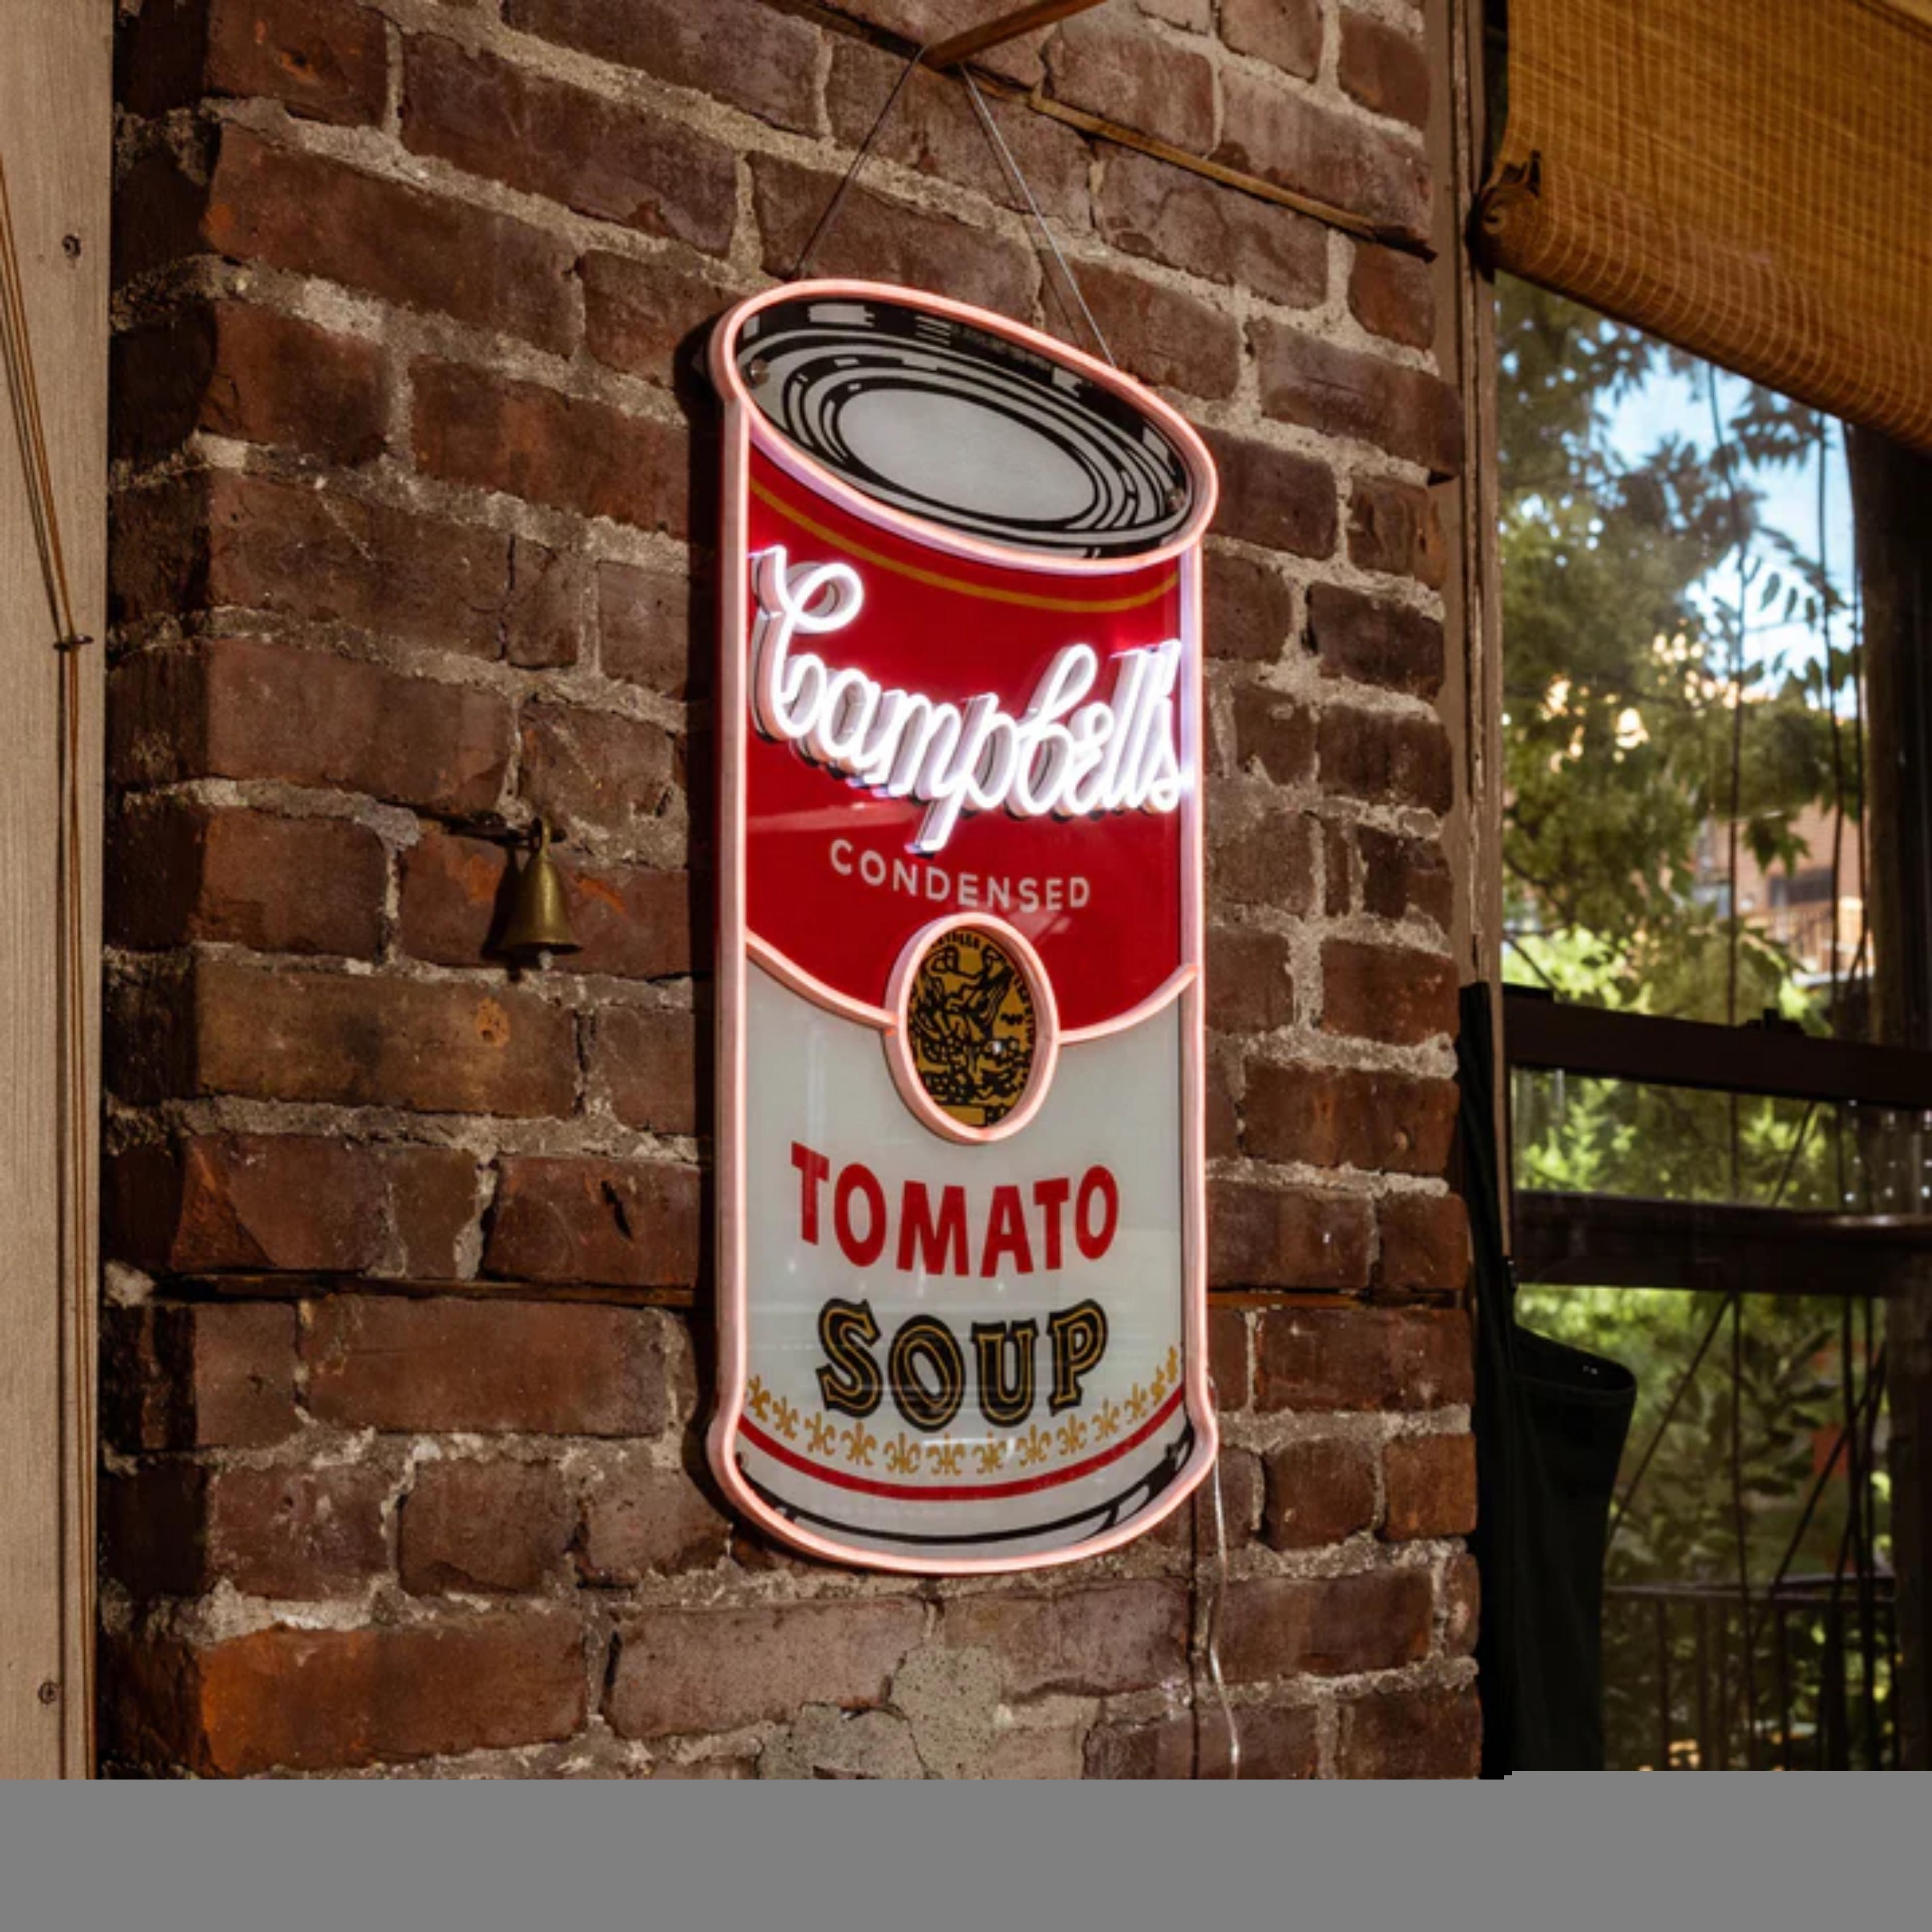 Andy Warhol
Neon light Campbell's Soup Can Wall Display Sign, 2022
Brand new in bespoke box with original packaging bearing Warhol's authorized printed signature with everything included
Makes an excellent gift.
Acrylic-printed soup can lined with